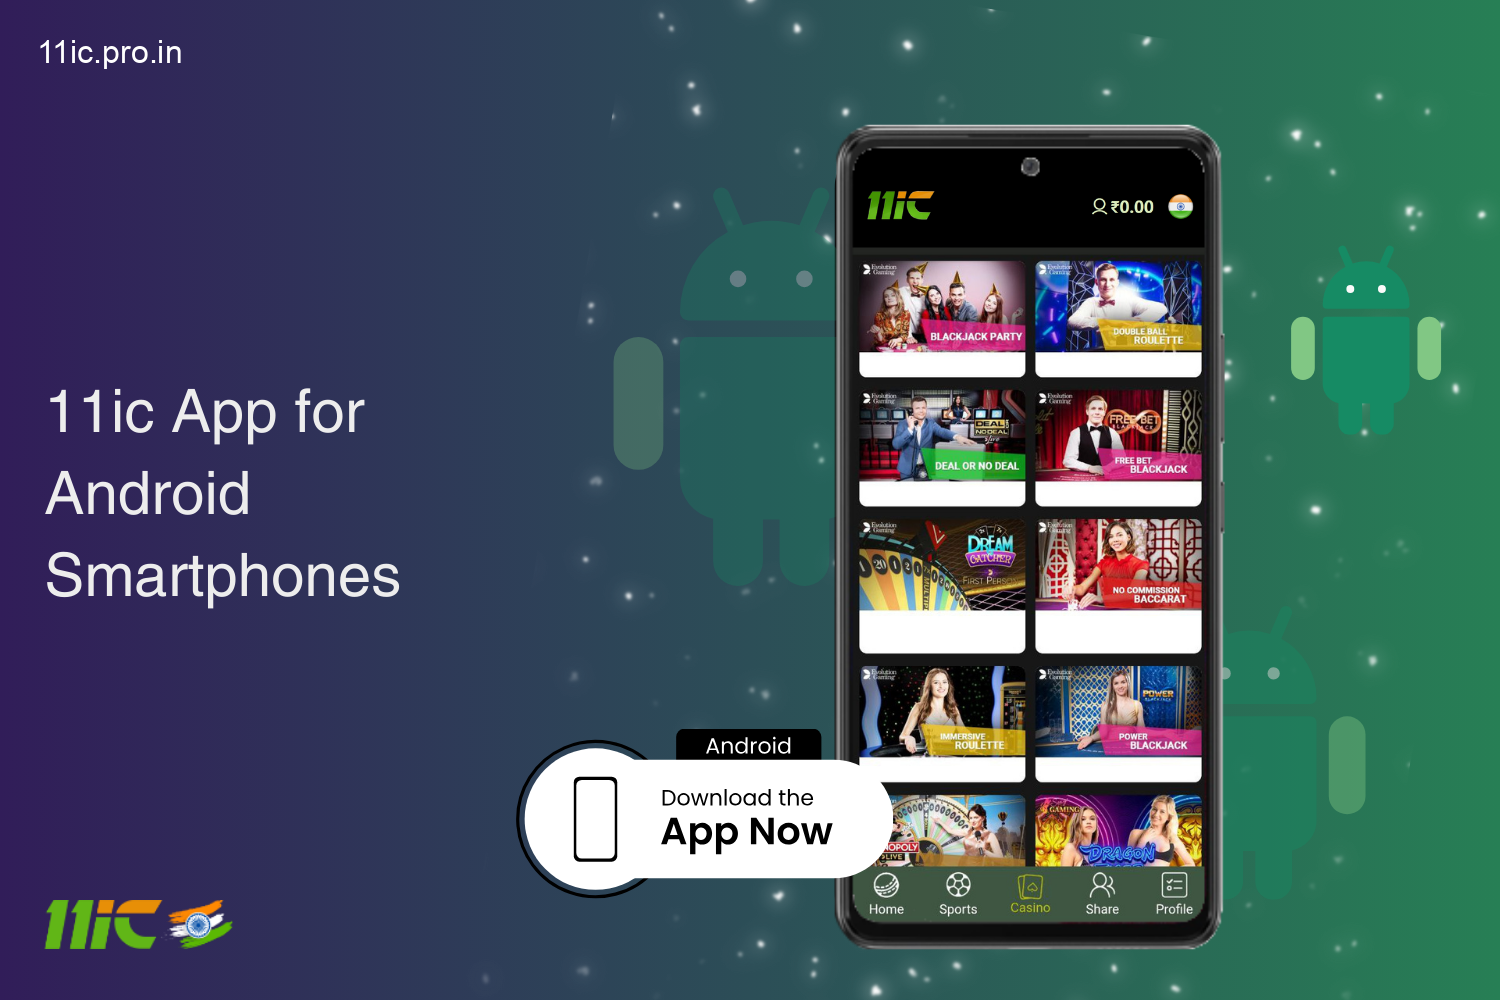 India's optimized 11ic Android app for India is fast on smartphones and allows you to play casino games and bet on sports while retaining all account management features